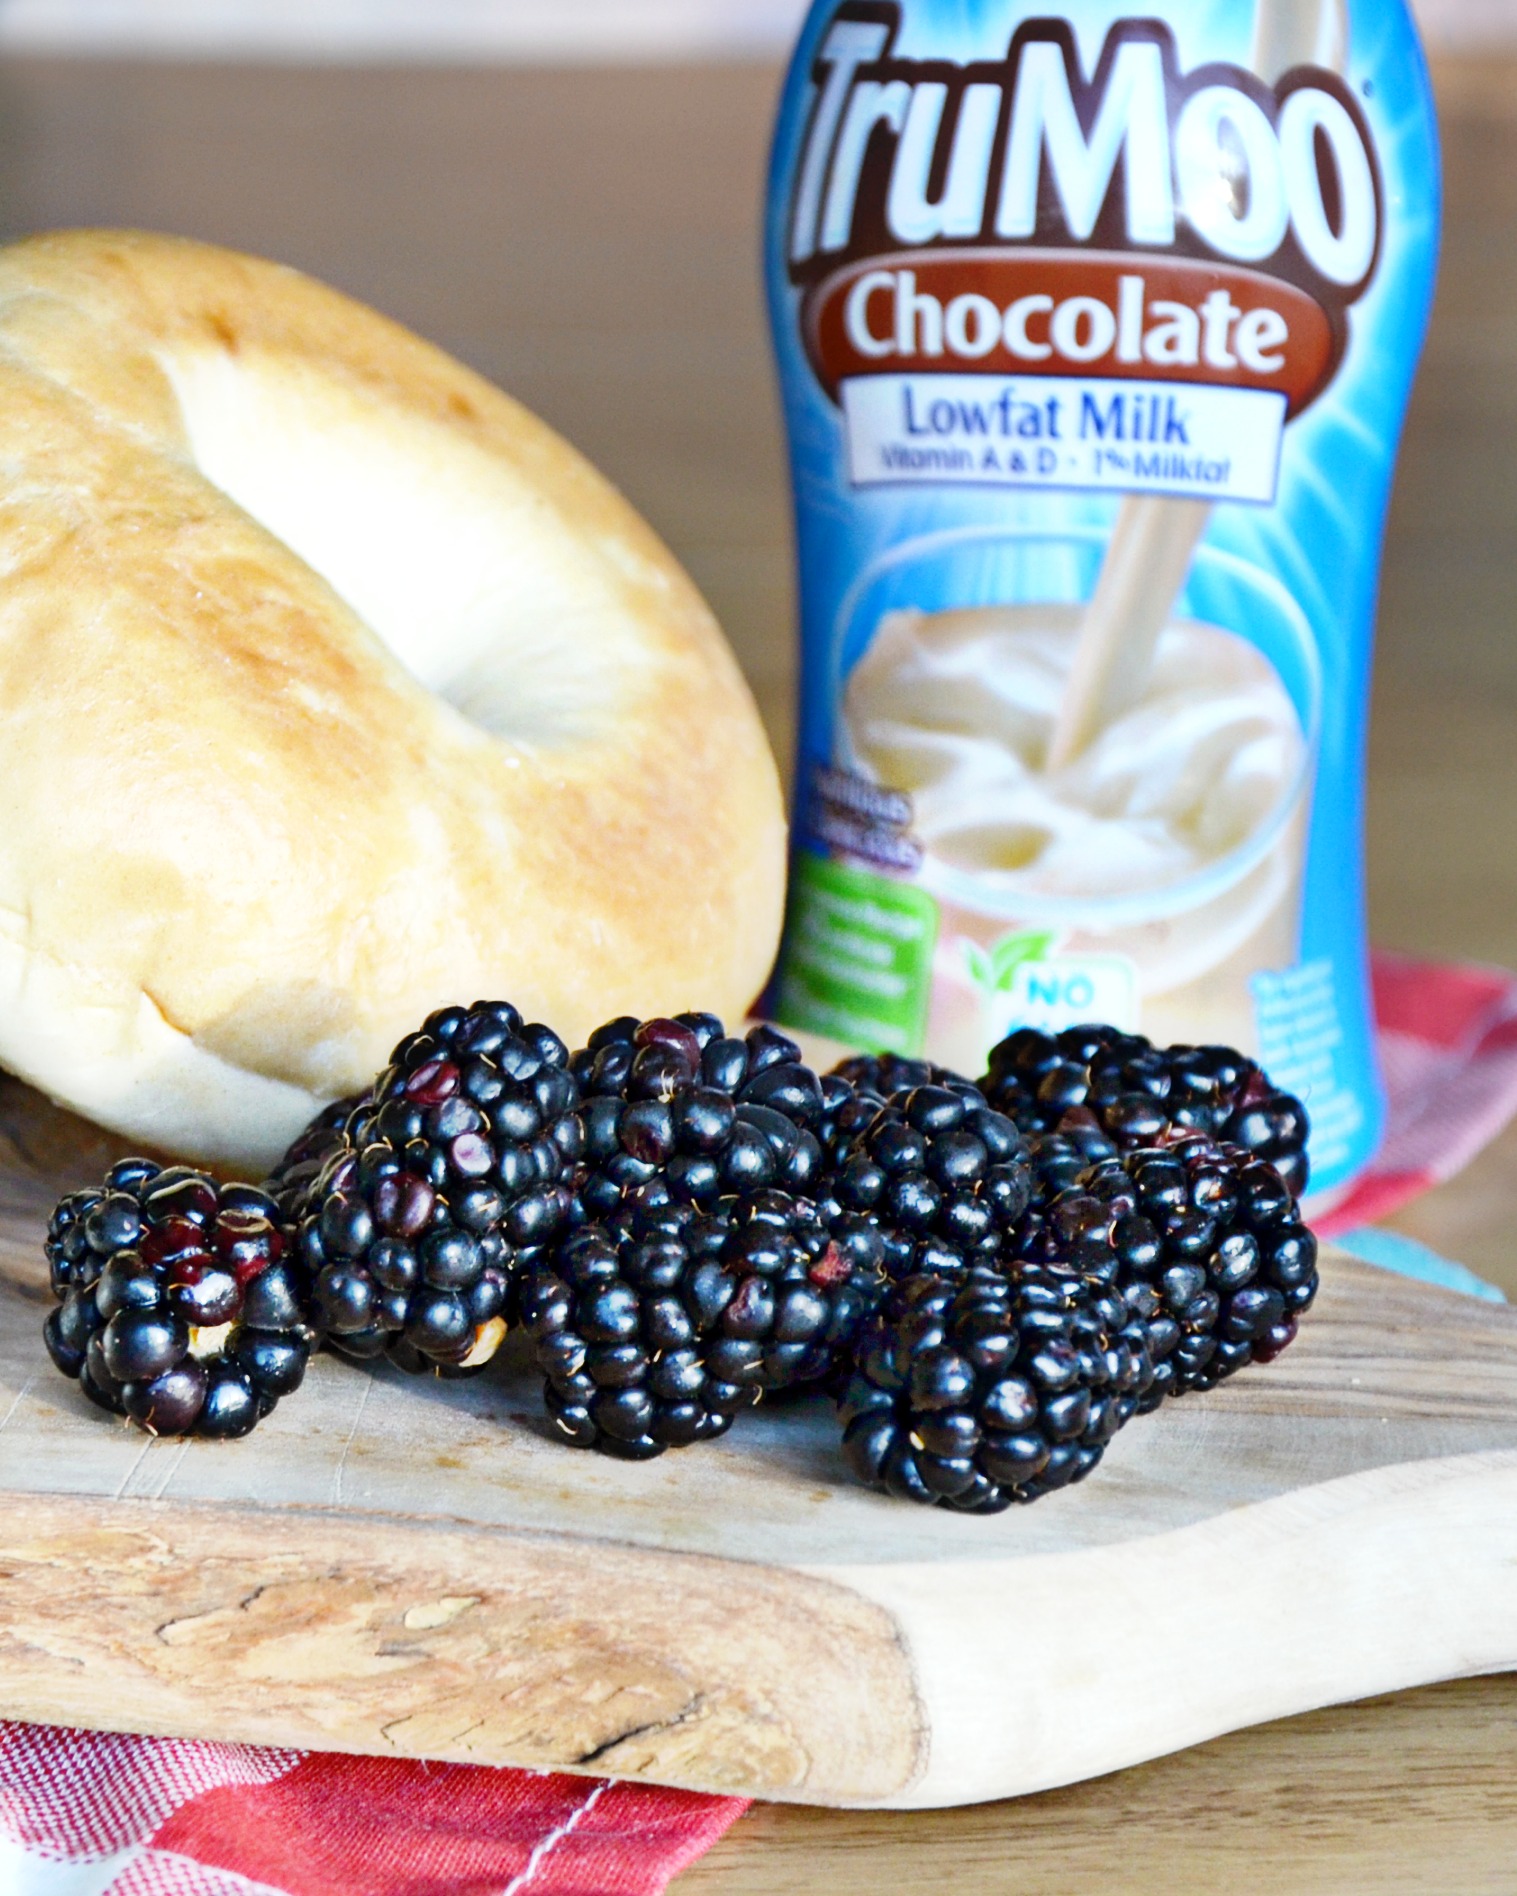 Bagels, cream cheese, blackberries and chocolate milk are a great nutritious snack. 